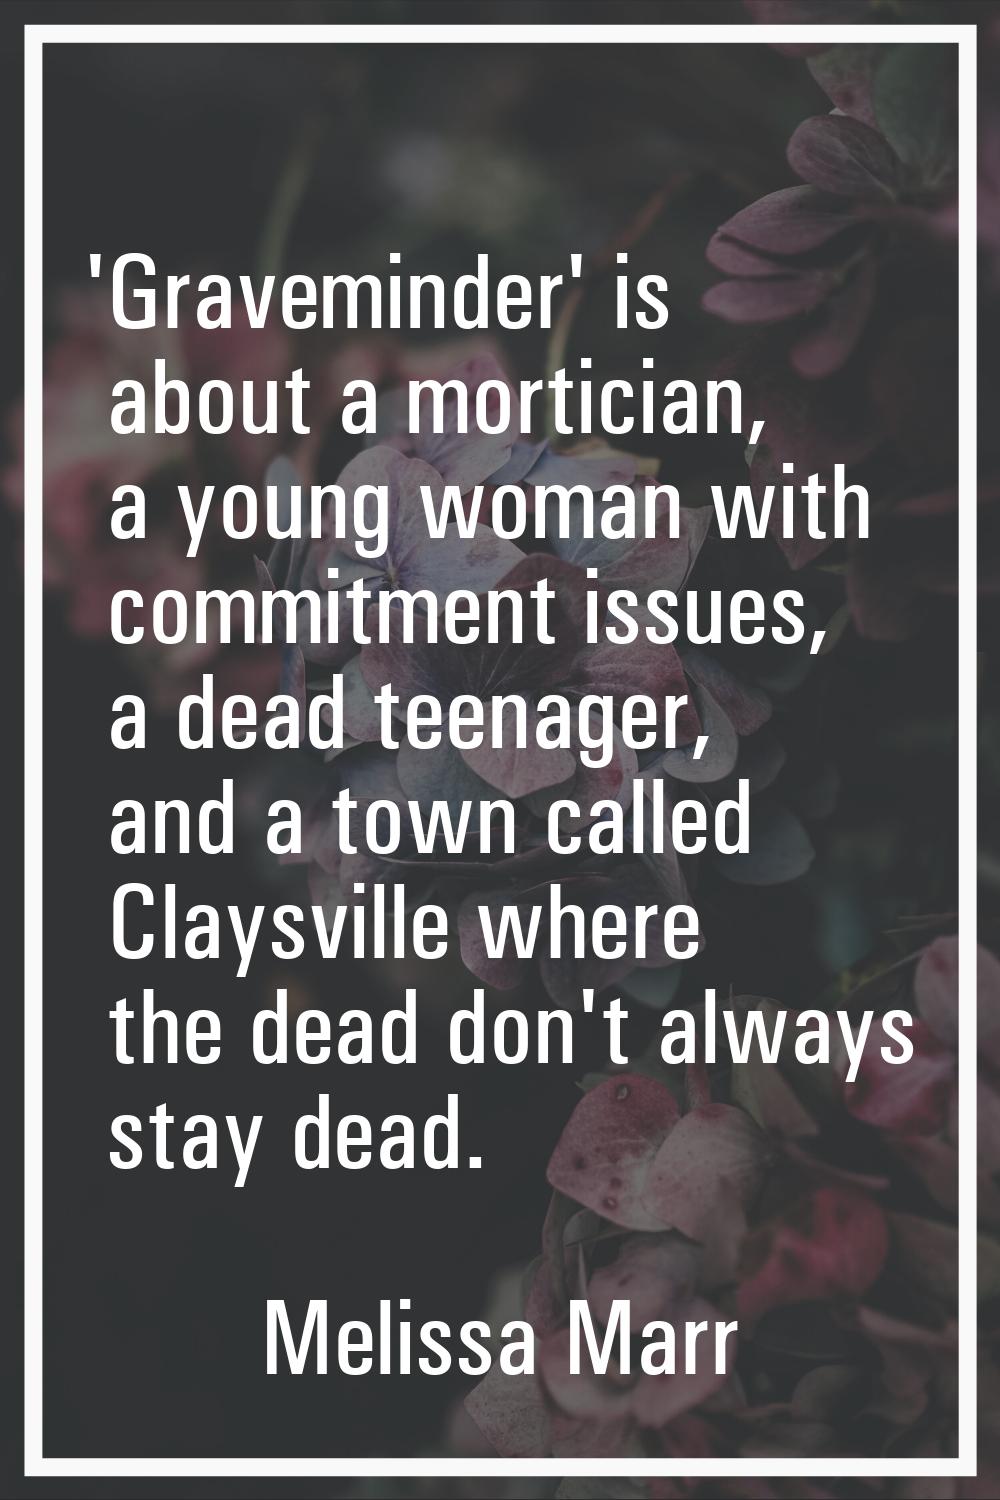 'Graveminder' is about a mortician, a young woman with commitment issues, a dead teenager, and a to